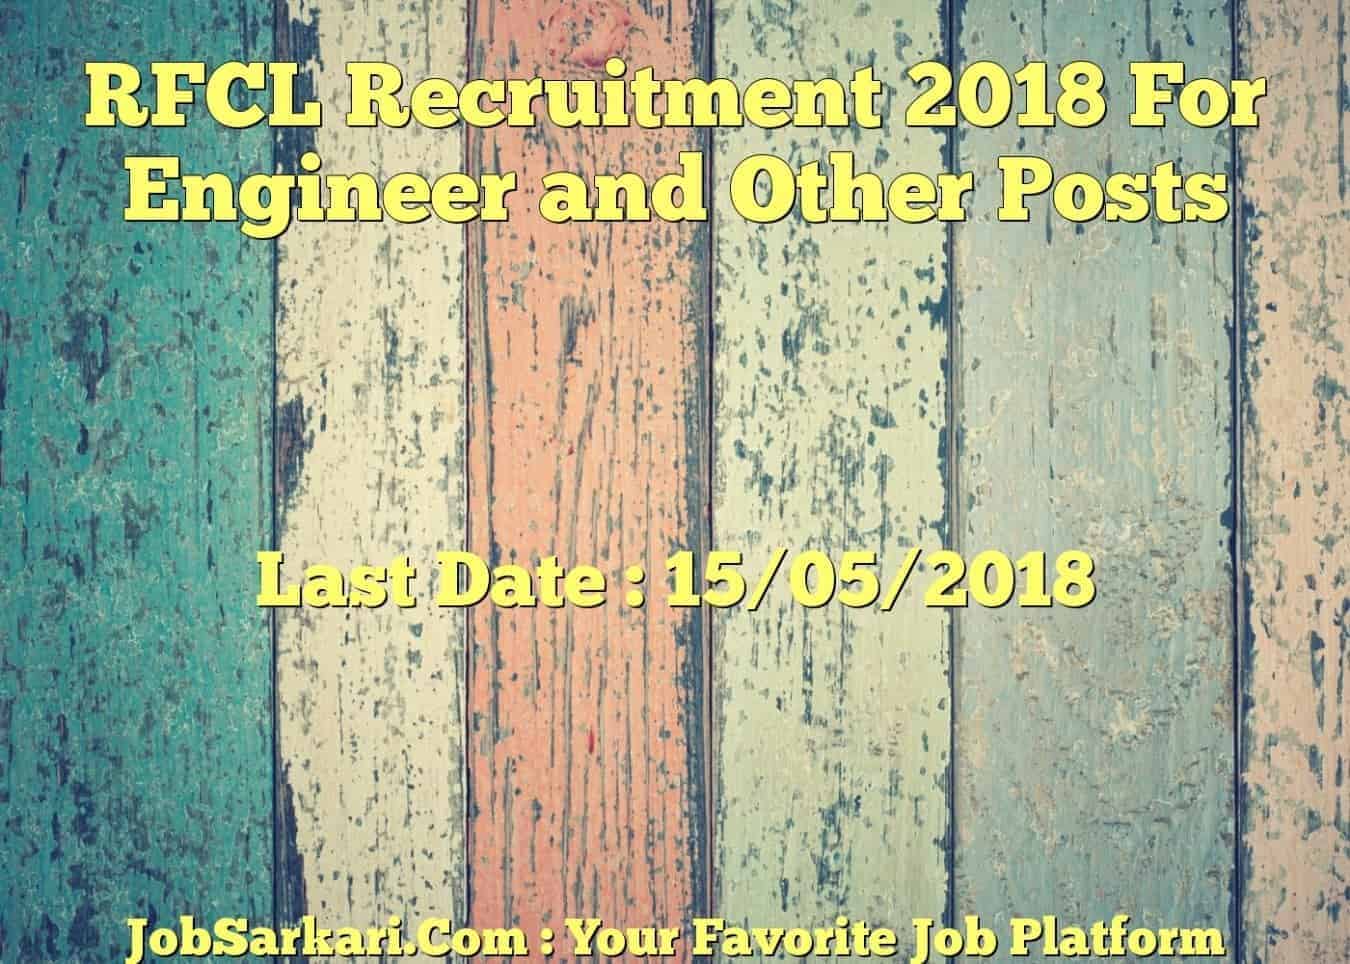 RFCL Recruitment 2018 For Engineer and Other Posts